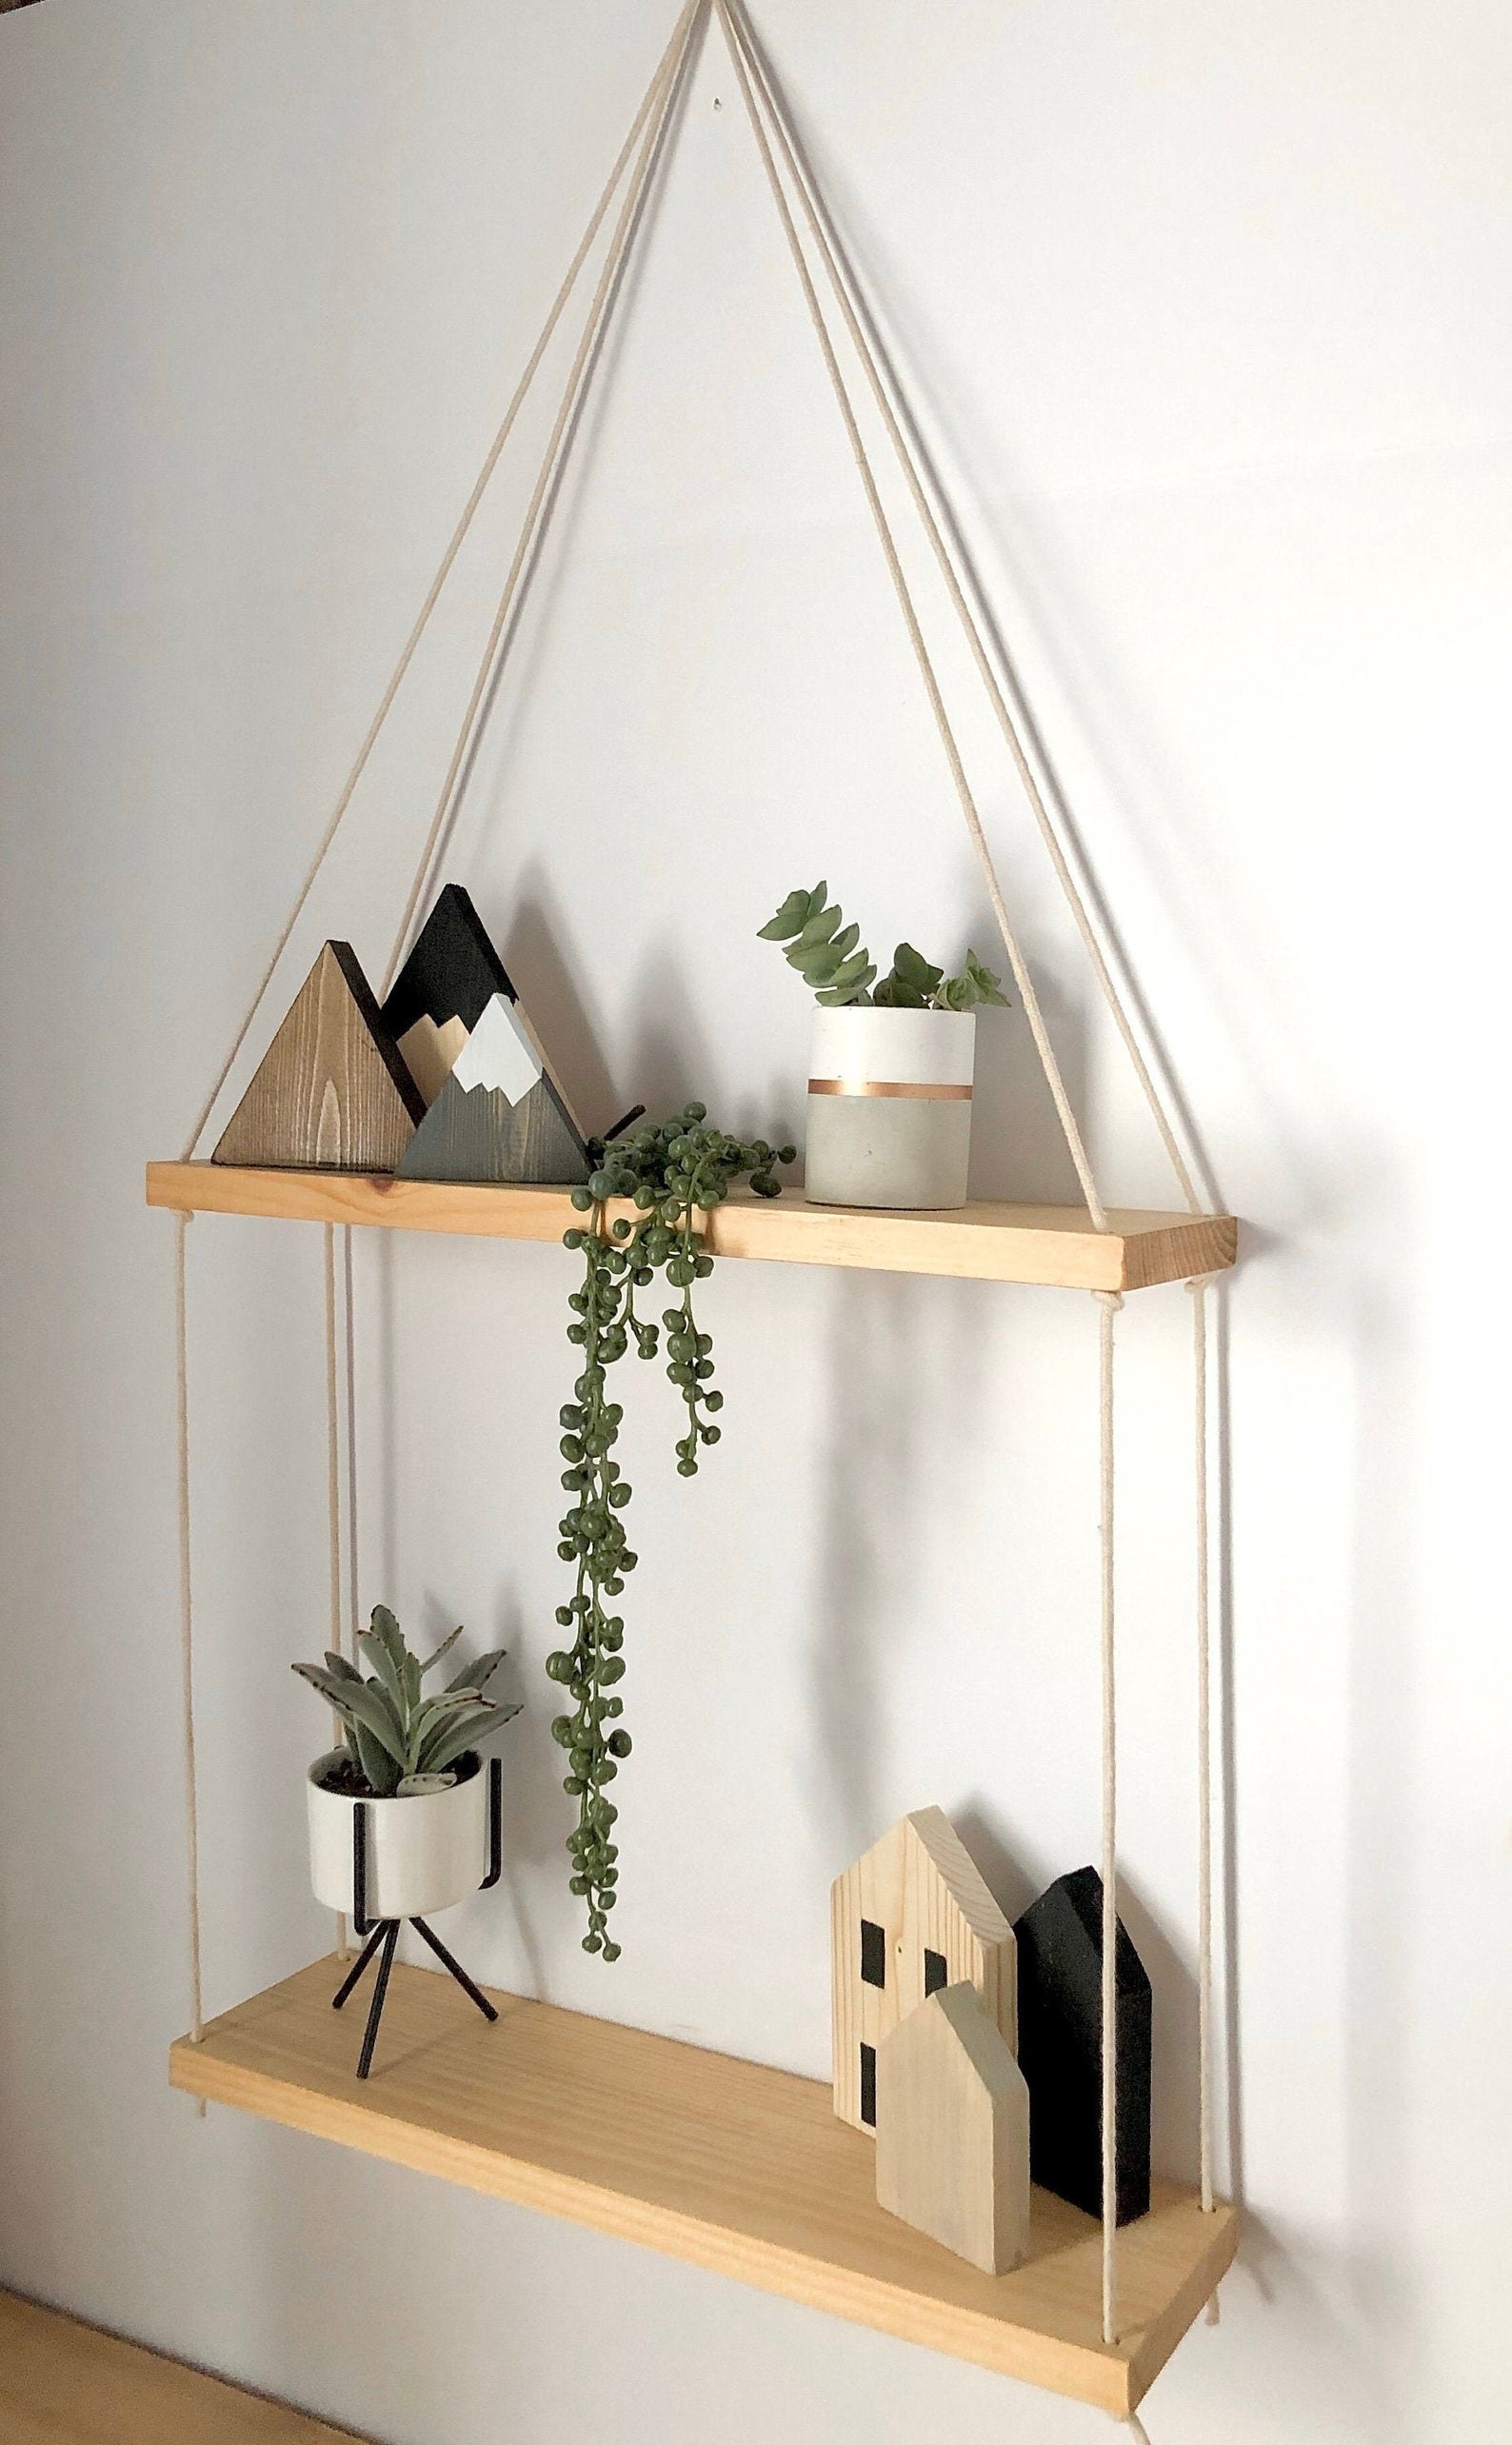 Two-tiered hanging shelf hanging on wall